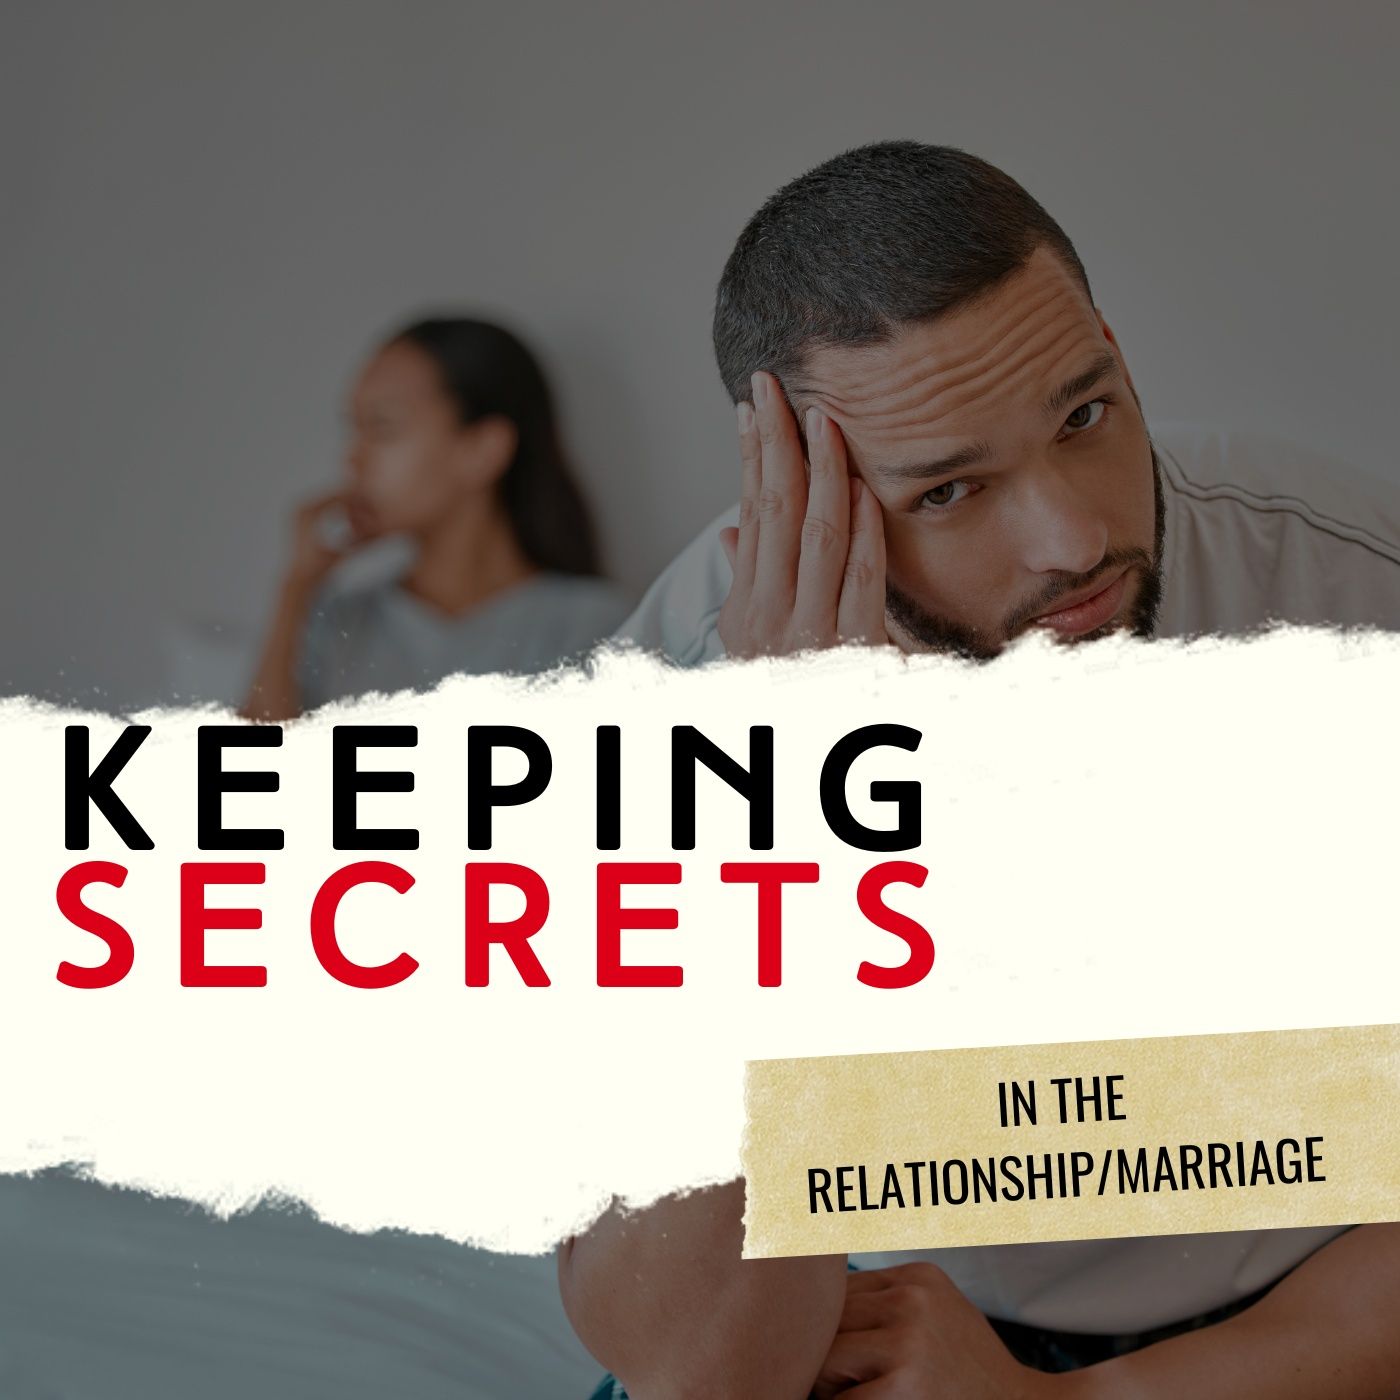 The Effects of Keeping Secrets In the Relationship/Marriage.